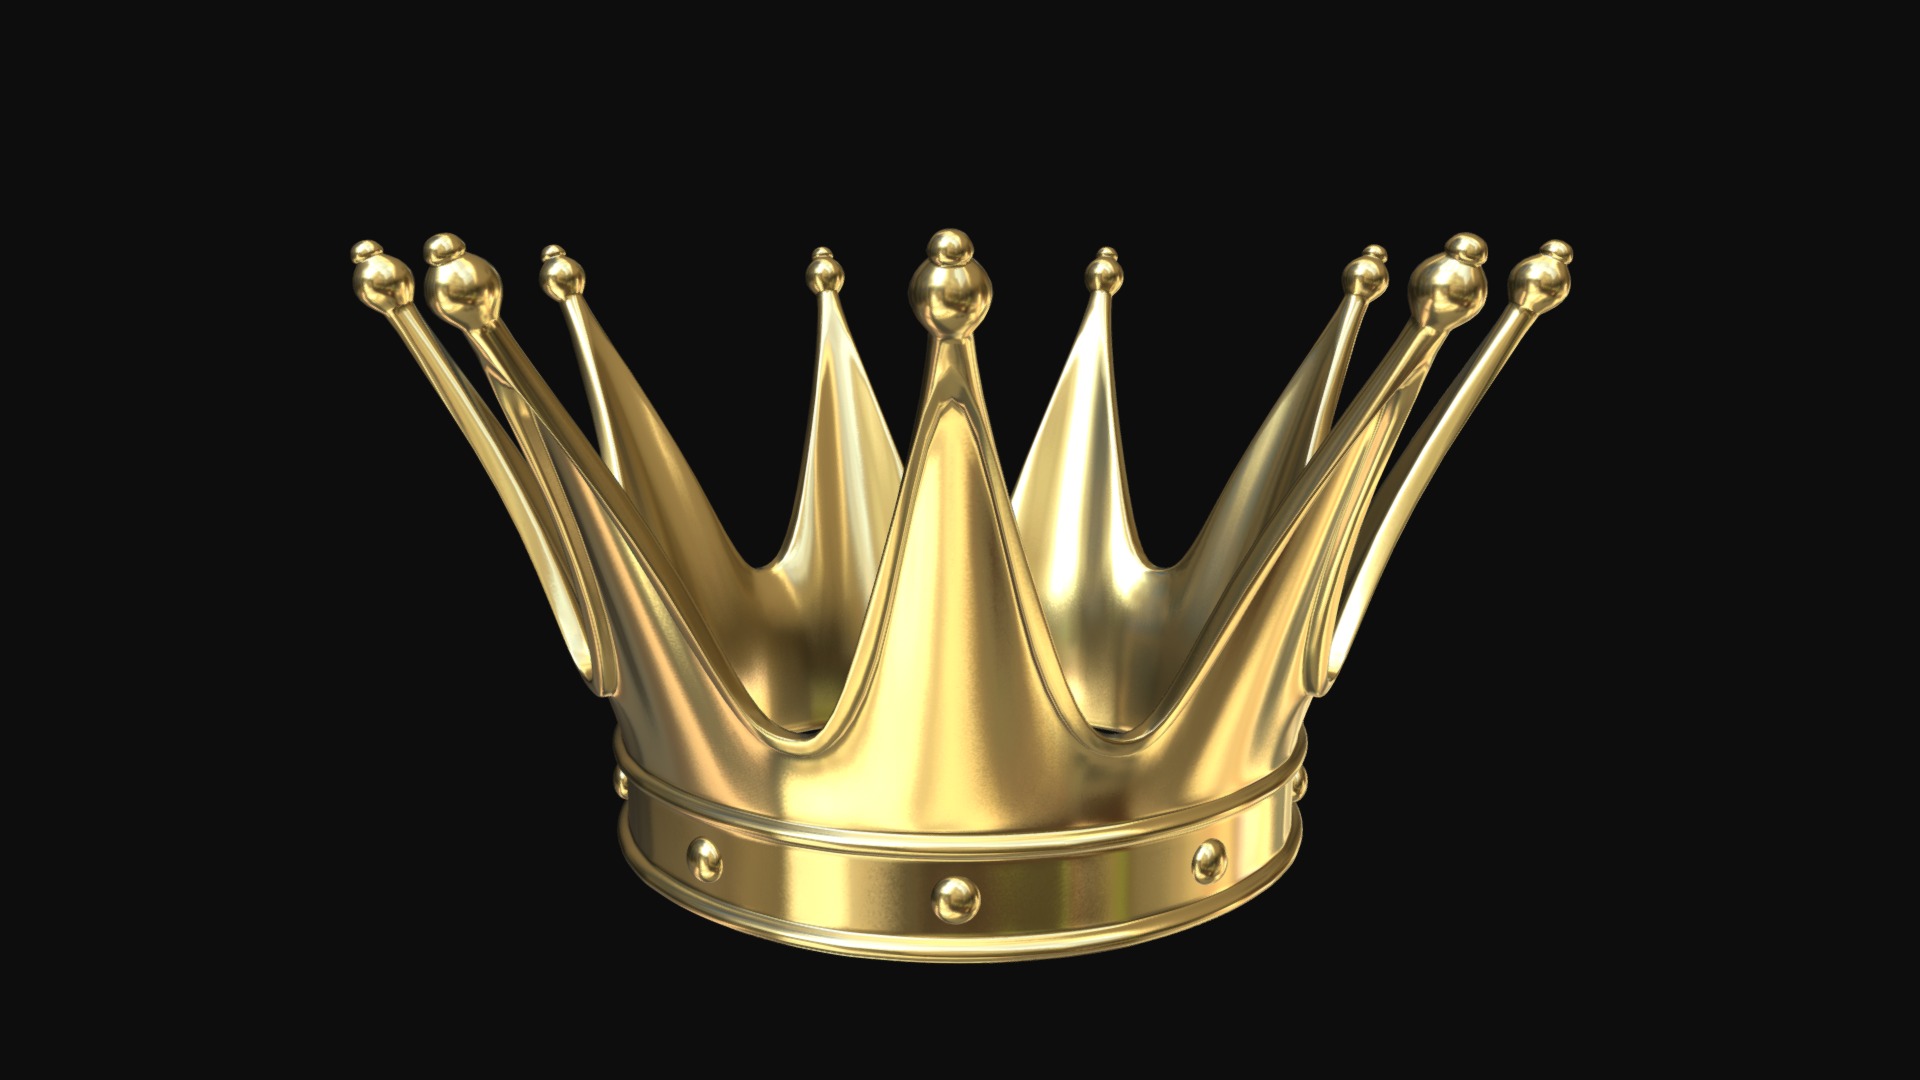 3D model Gold crown 2 - This is a 3D model of the Gold crown 2. The 3D model is about a gold and silver weighing scale.